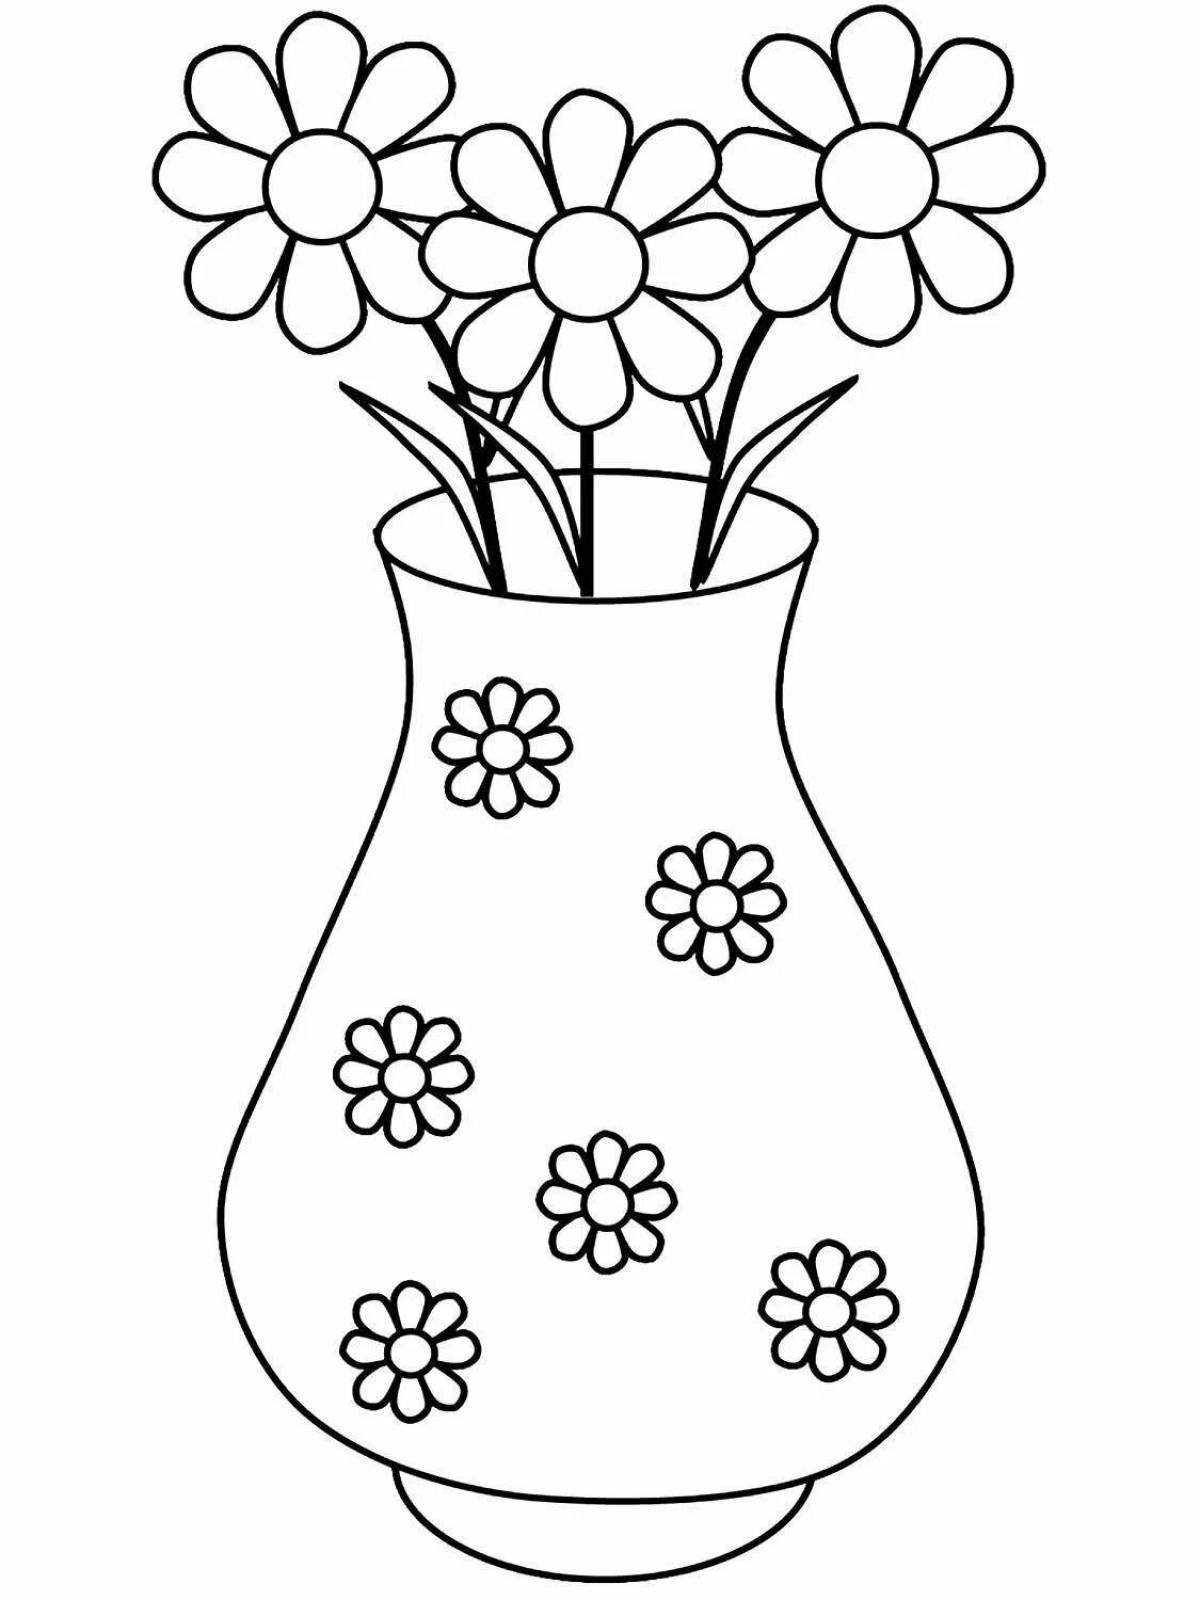 Coloring book poised flowers in a vase